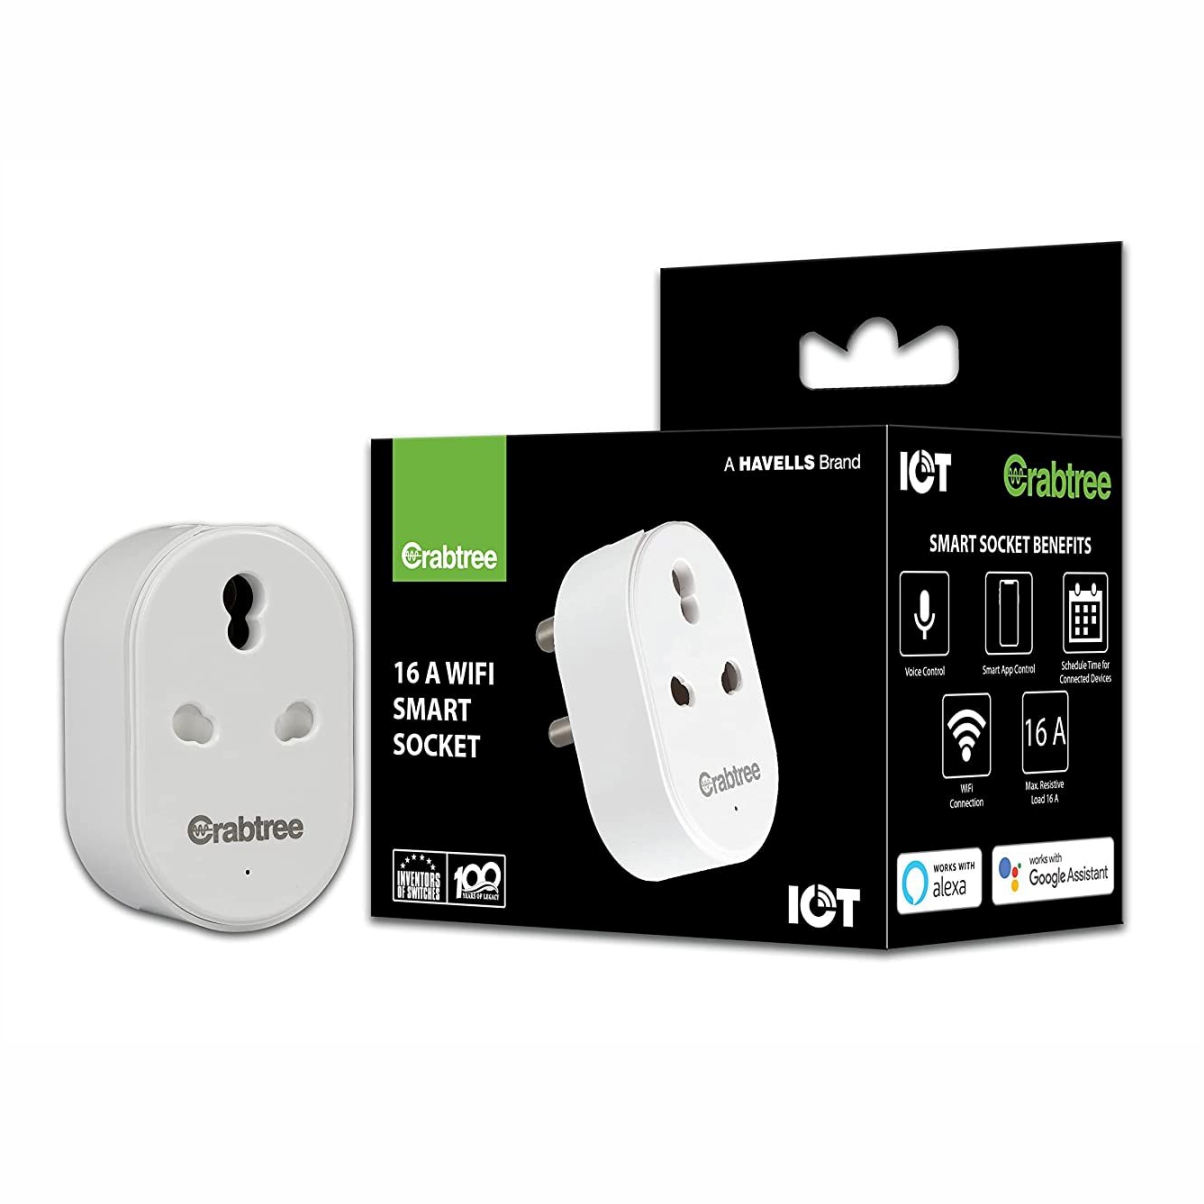 Havells CRABTREE 16 A WiFi Smart Plug (ACST161603) with Energy Monitoring- Suitable for Large Appliances like Geysers, Heaters, OFR's, Air Conditioners (Works with Alexa and Google Assistant)- White